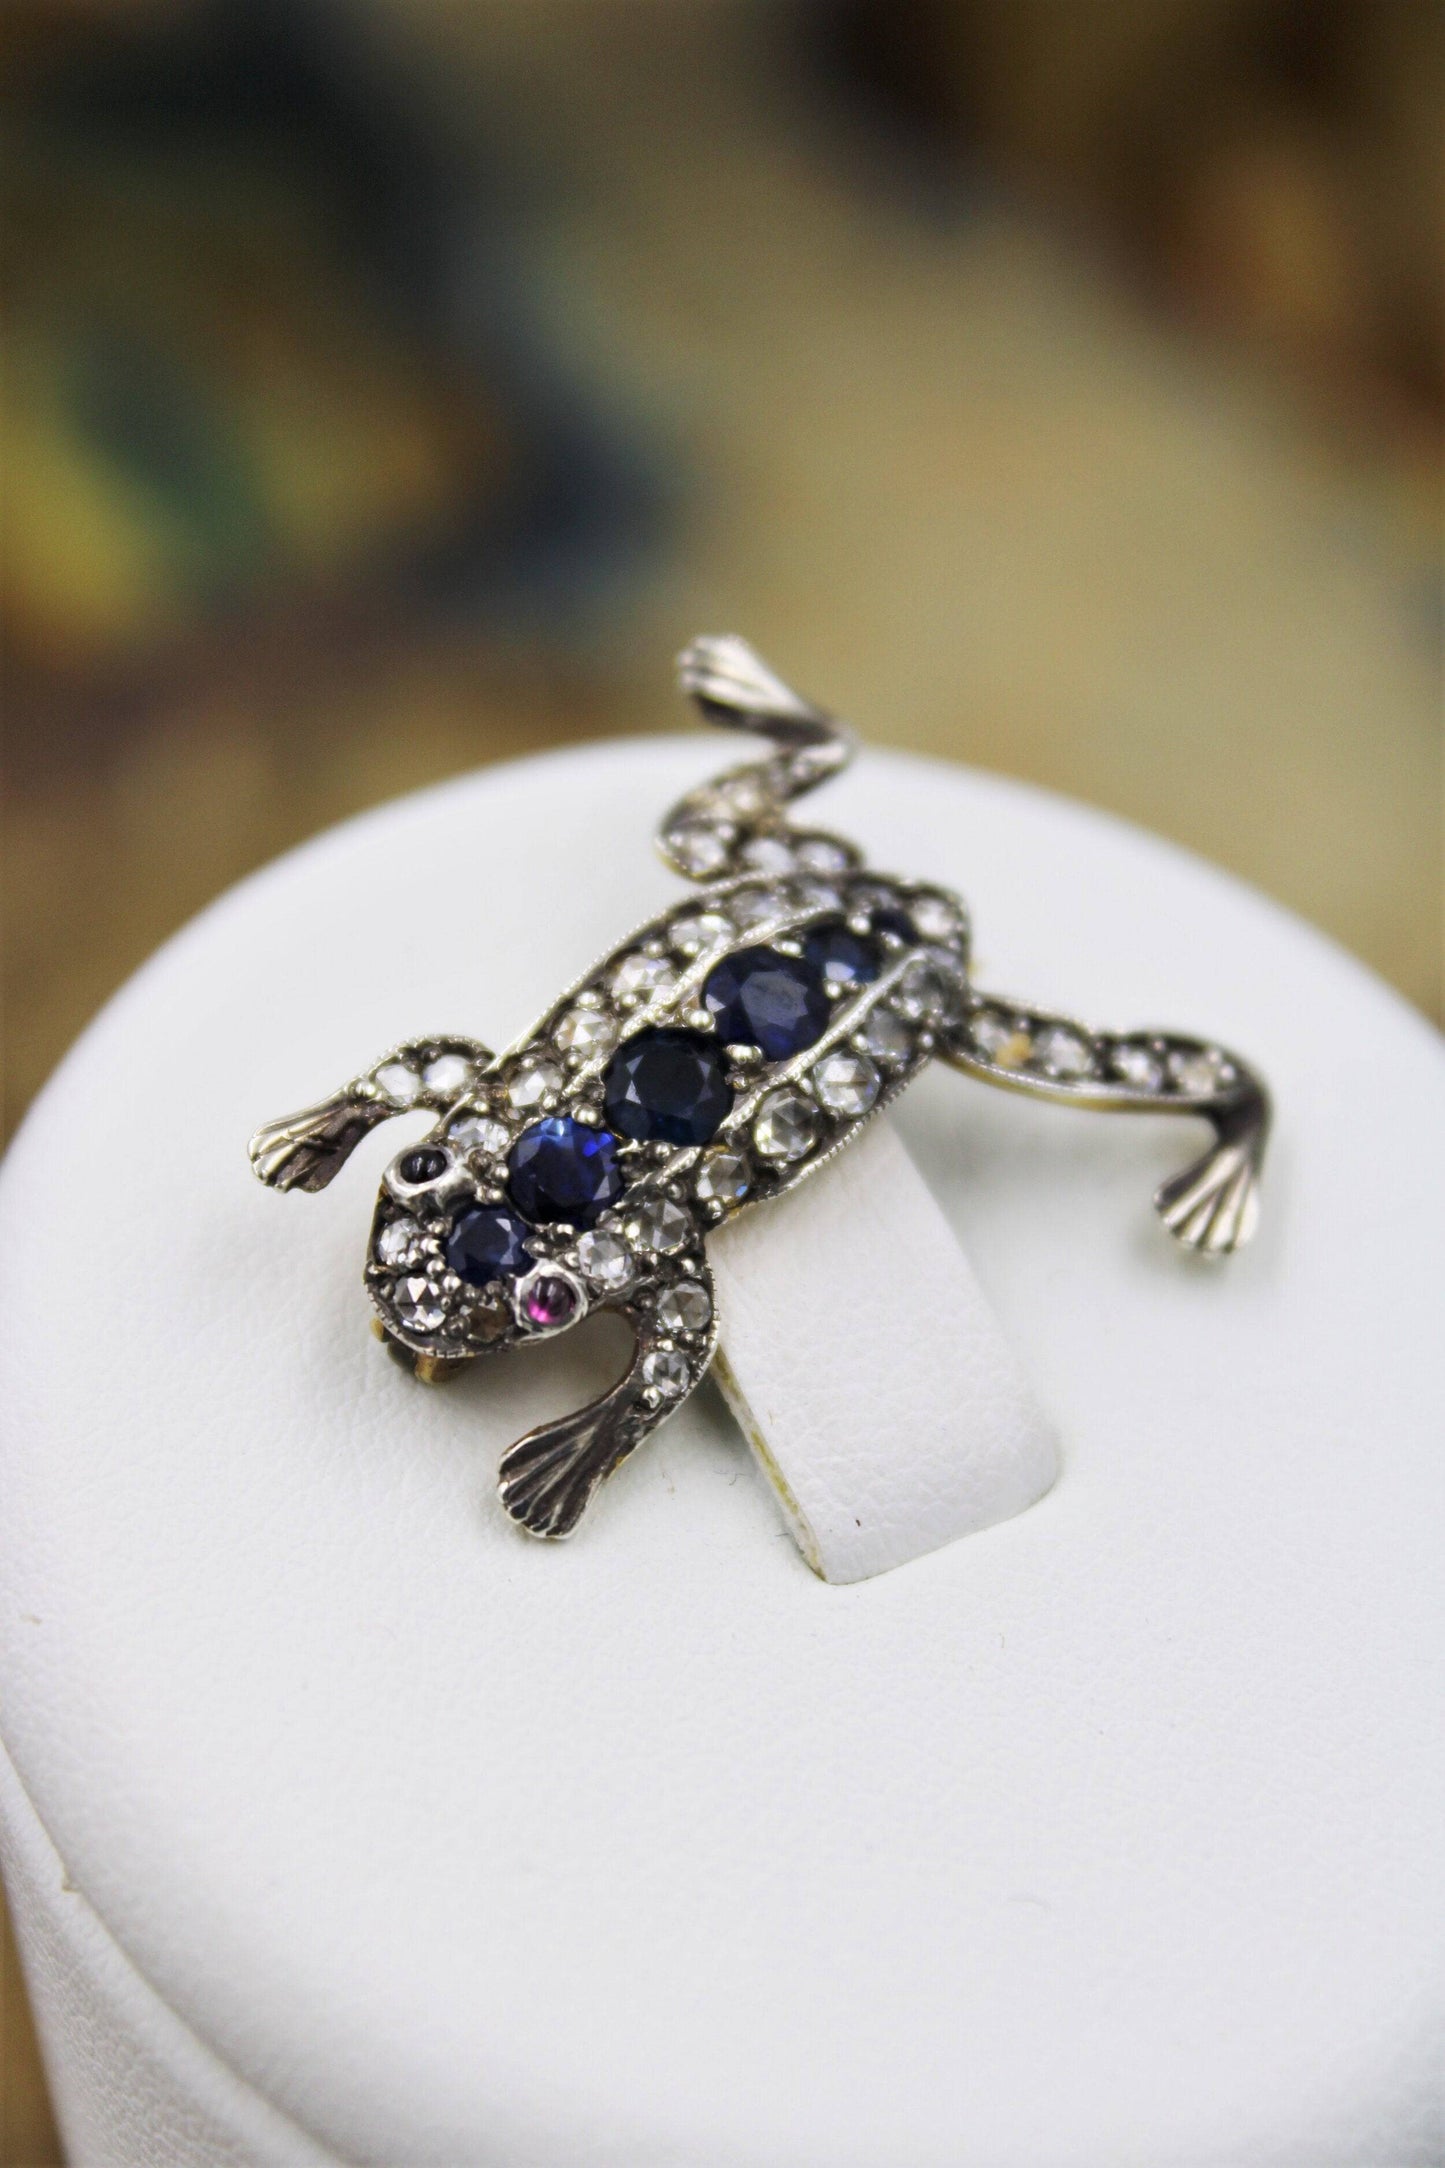 An exquisite Jumping Frog Brooch set with Diamonds and Sapphires in High Carat Yellow Gold & Platinum, Circa 1910 - Robin Haydock Antiques